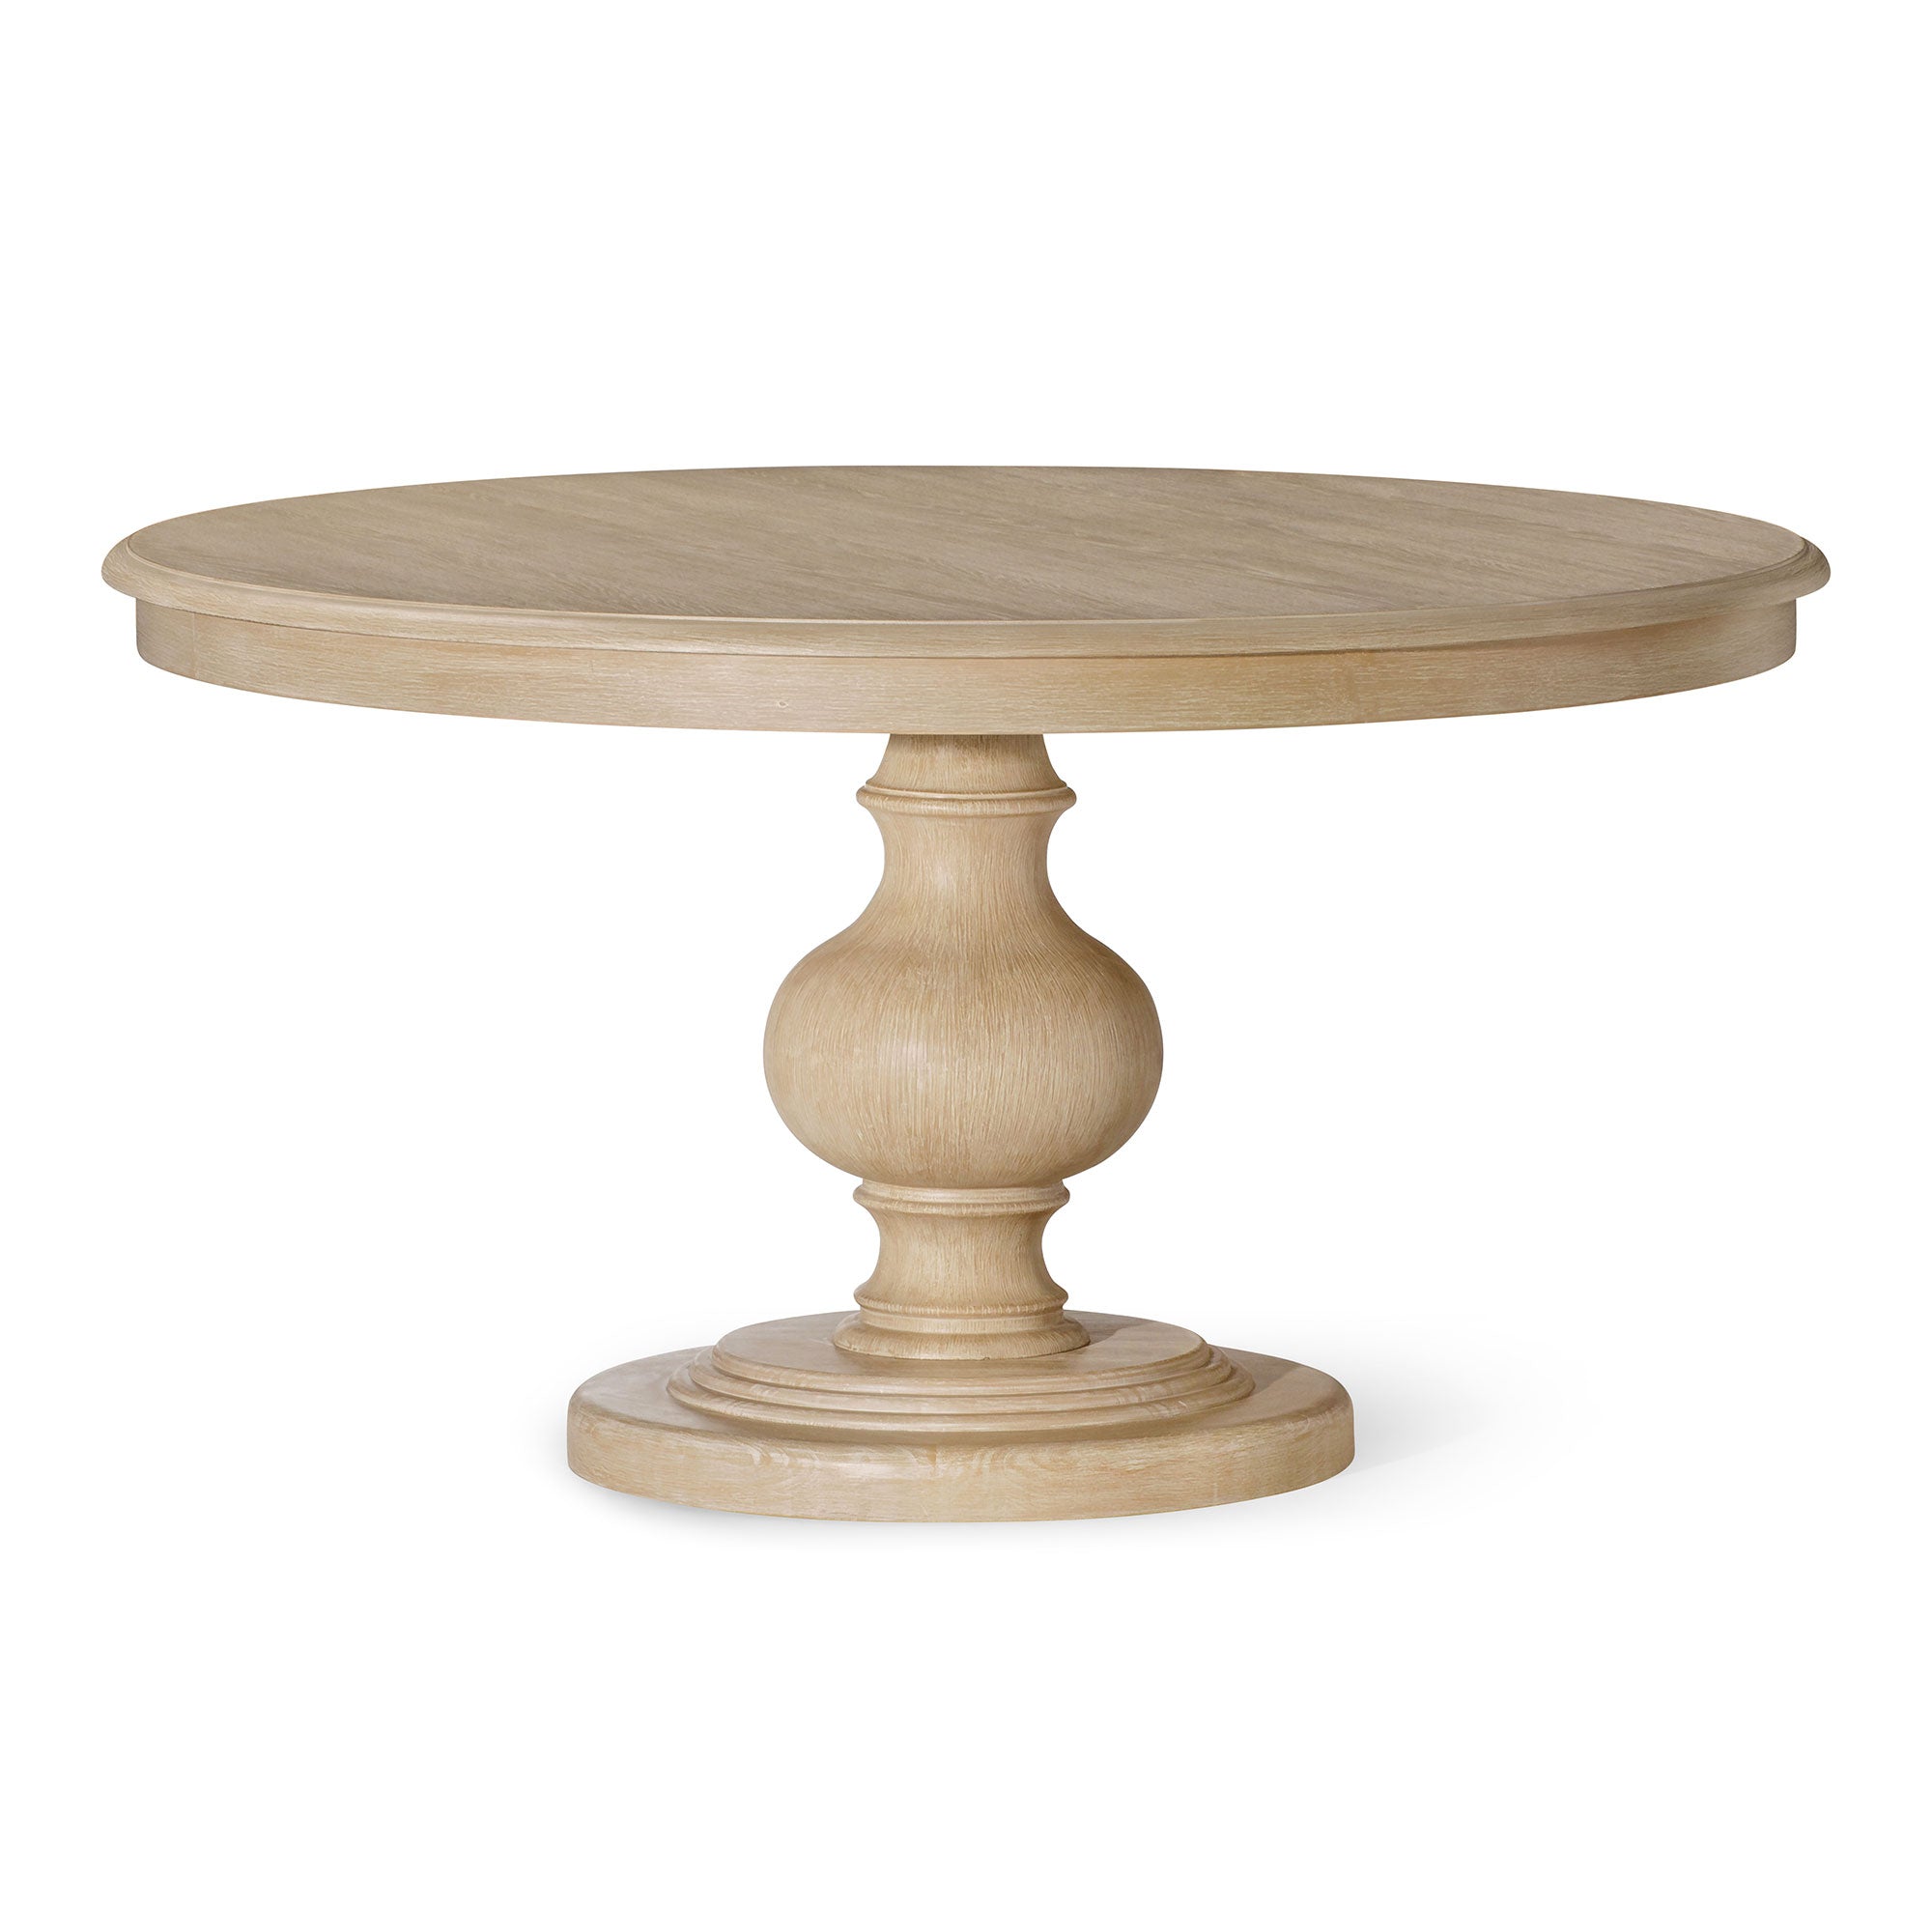 Zola Classical Round Wooden Dining Table in Antiqued White Finish in Dining Furniture by Maven Lane